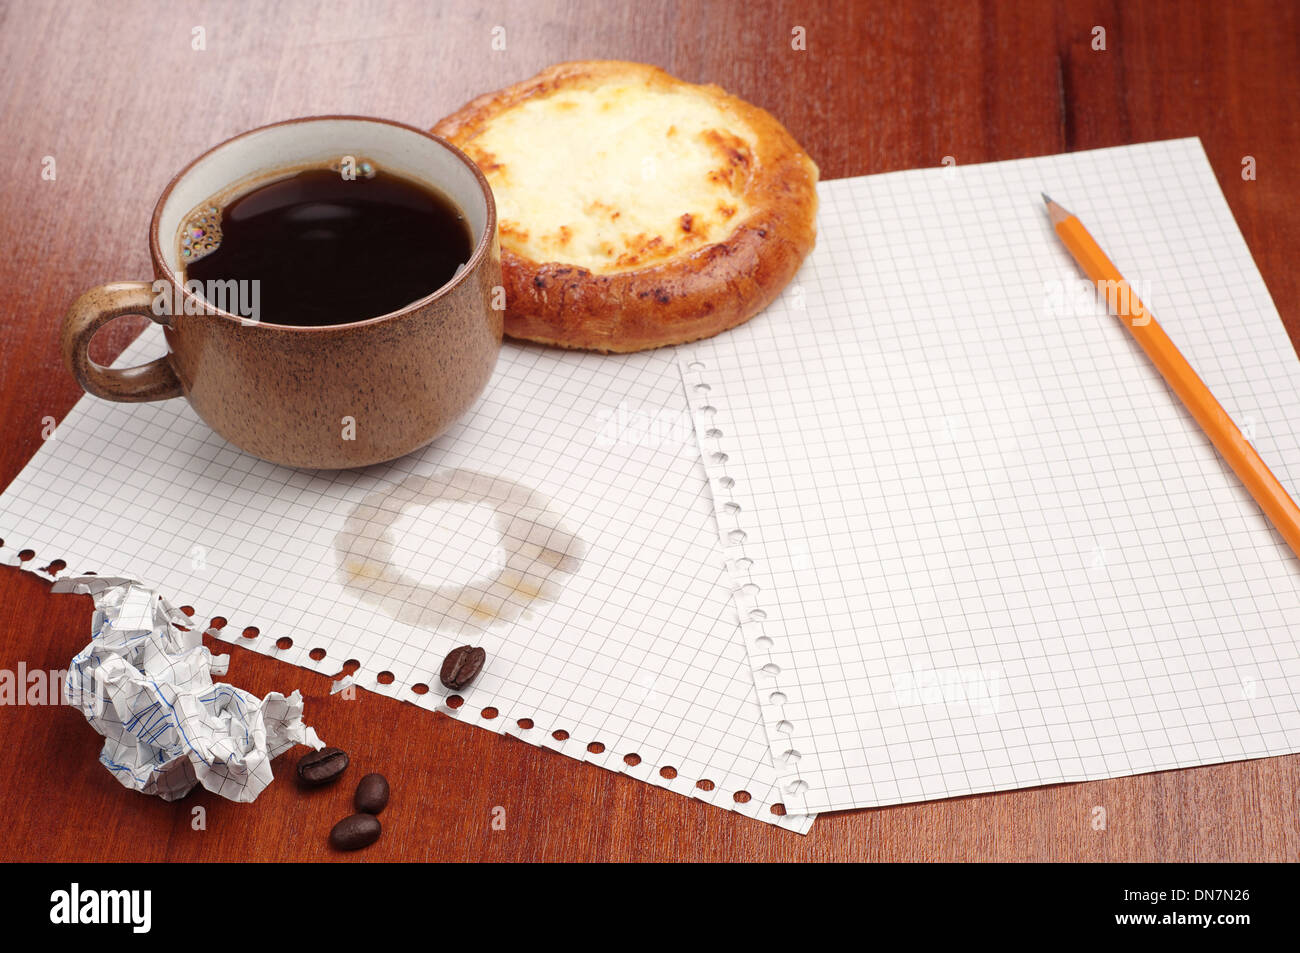 Cup of coffee with bun, pencil and crumpled paper on the table Stock Photo